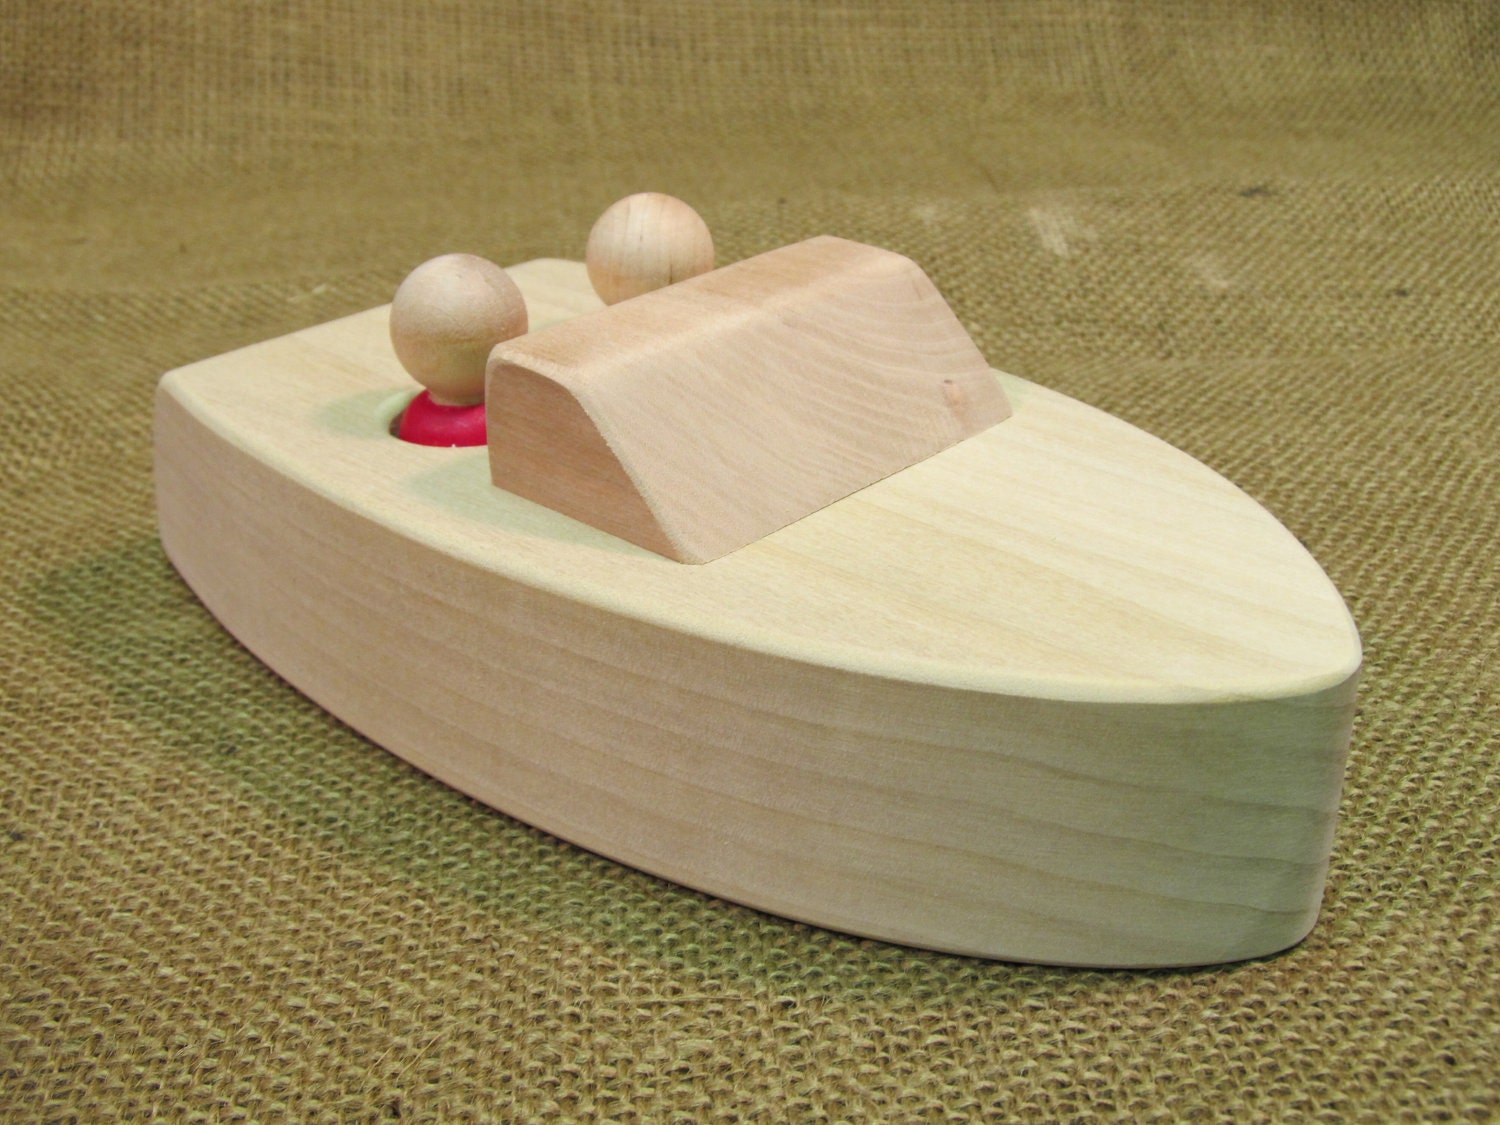 This is Toy wood paddle boat plans  boat plans